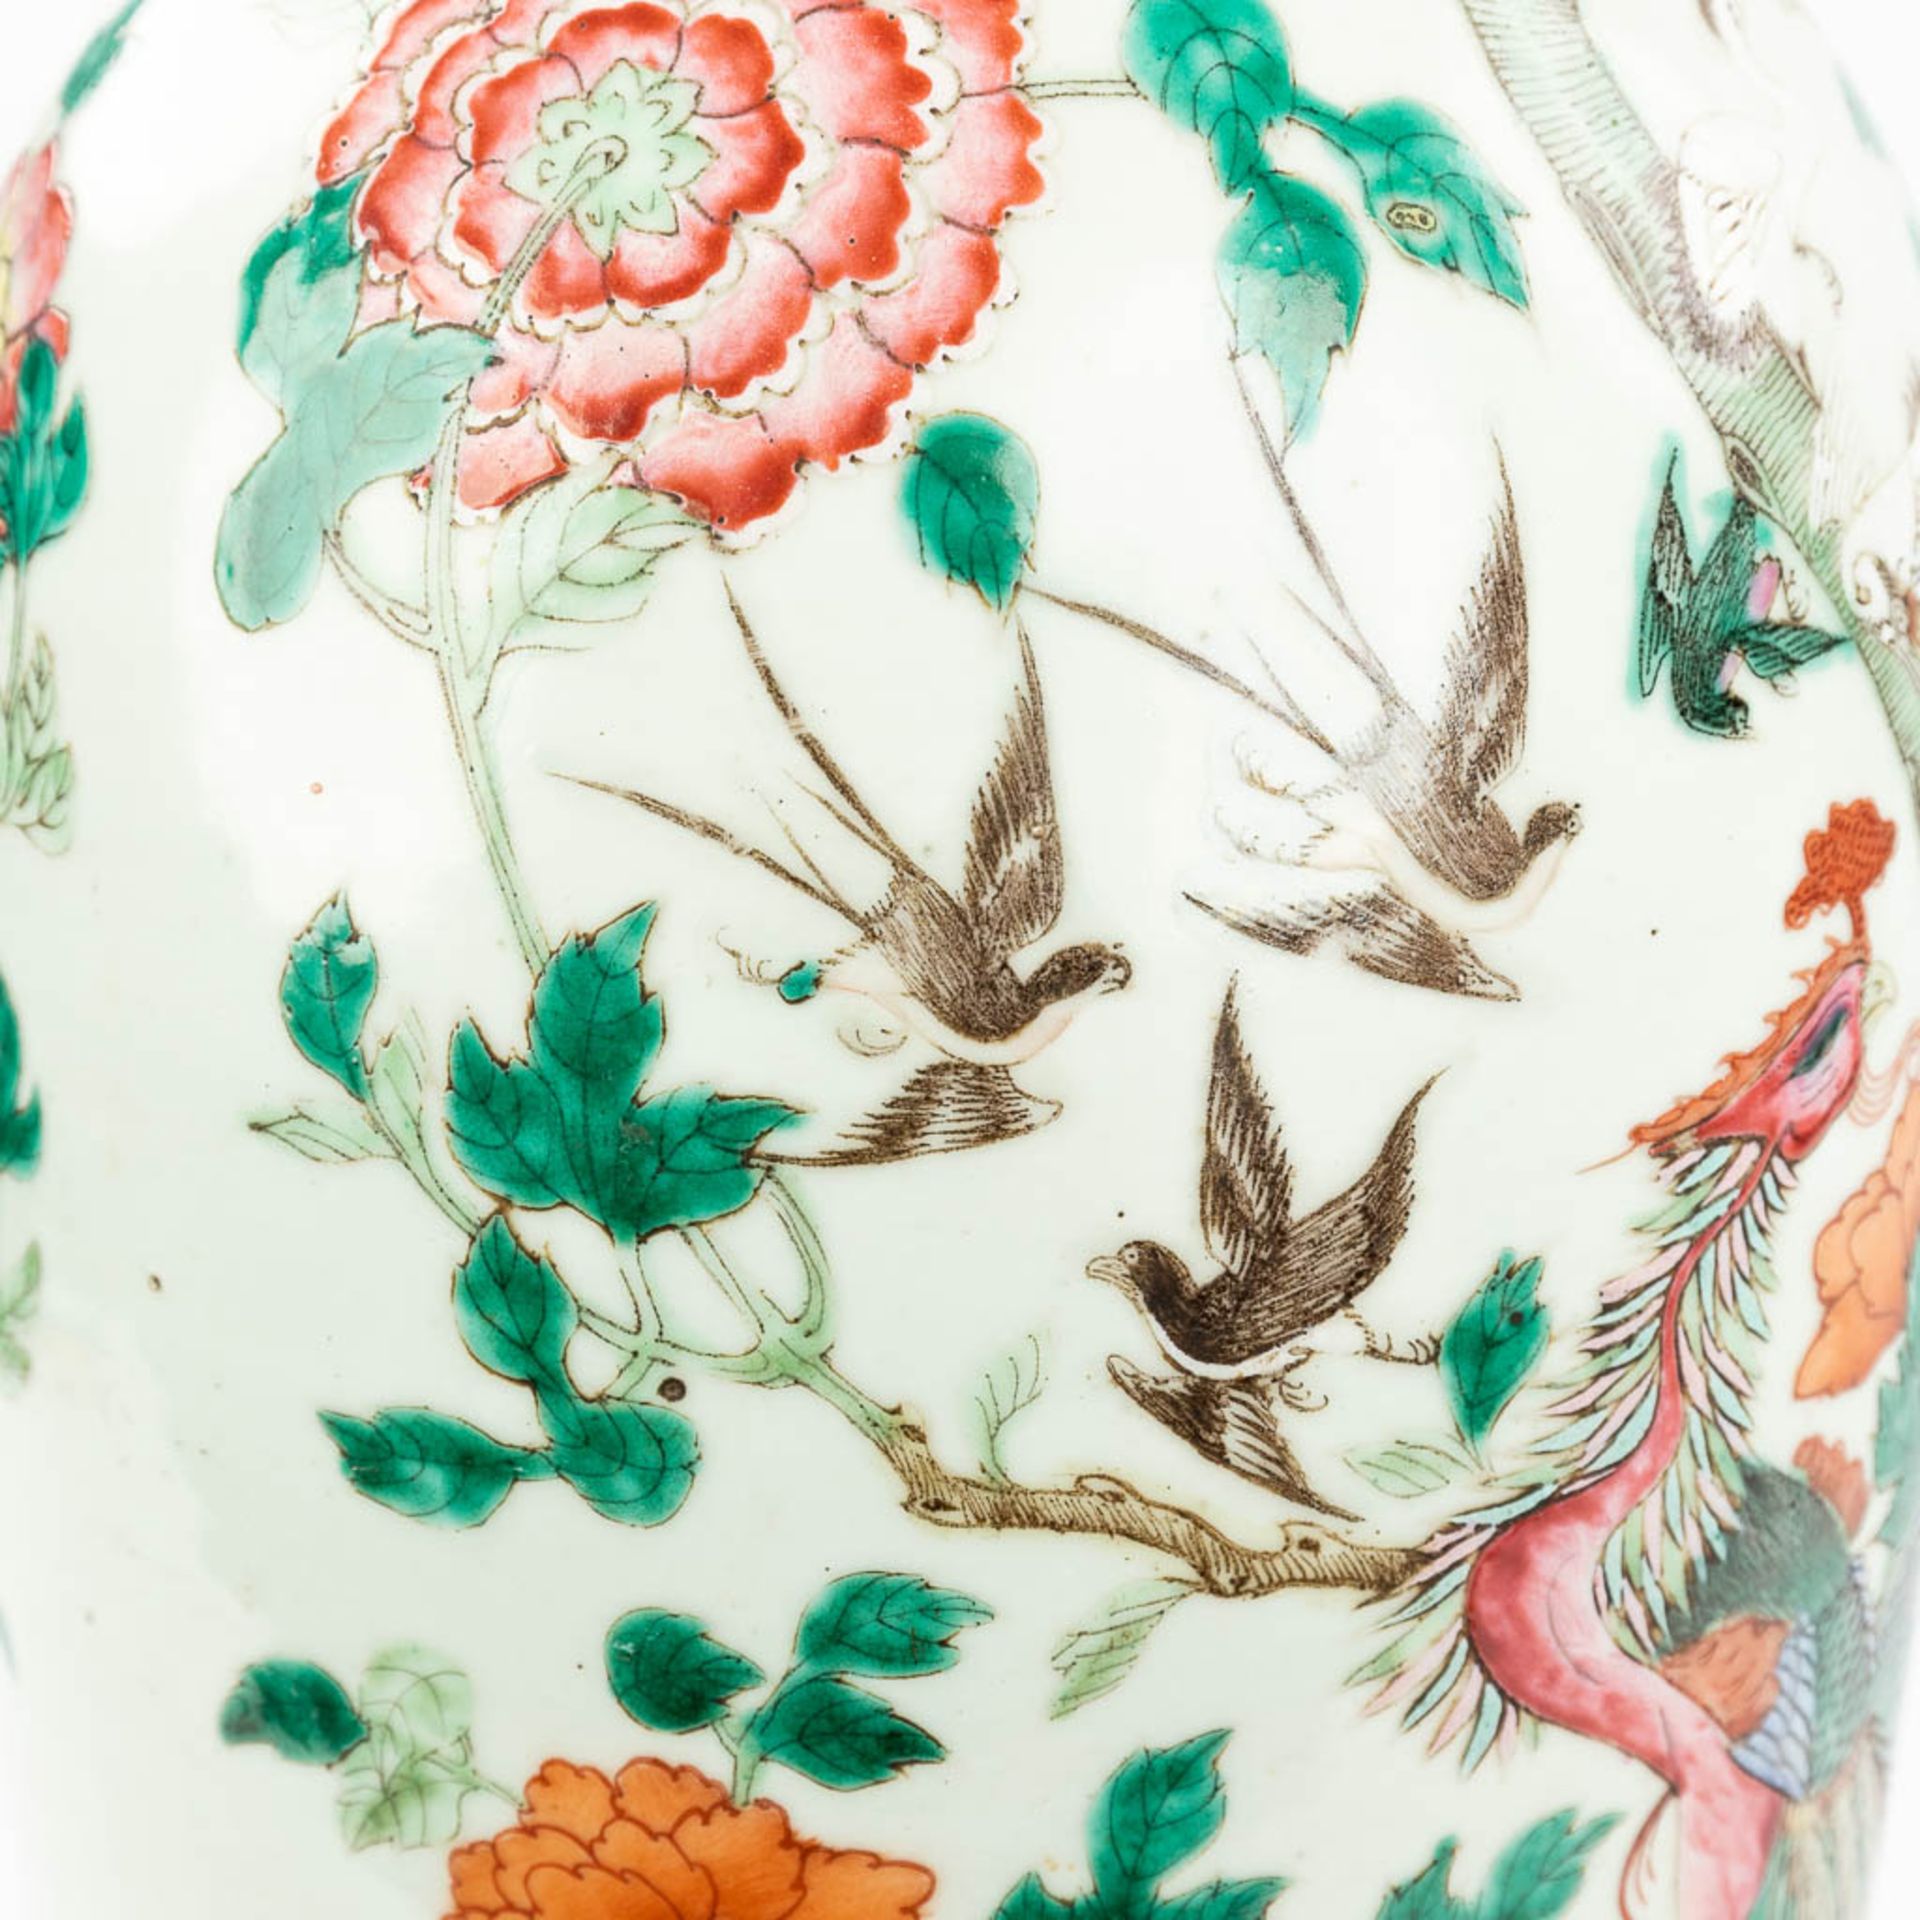 A Chinese vase made of porcelain, decorated with peacocks and birds. (61,5 x 24 cm) - Image 11 of 18